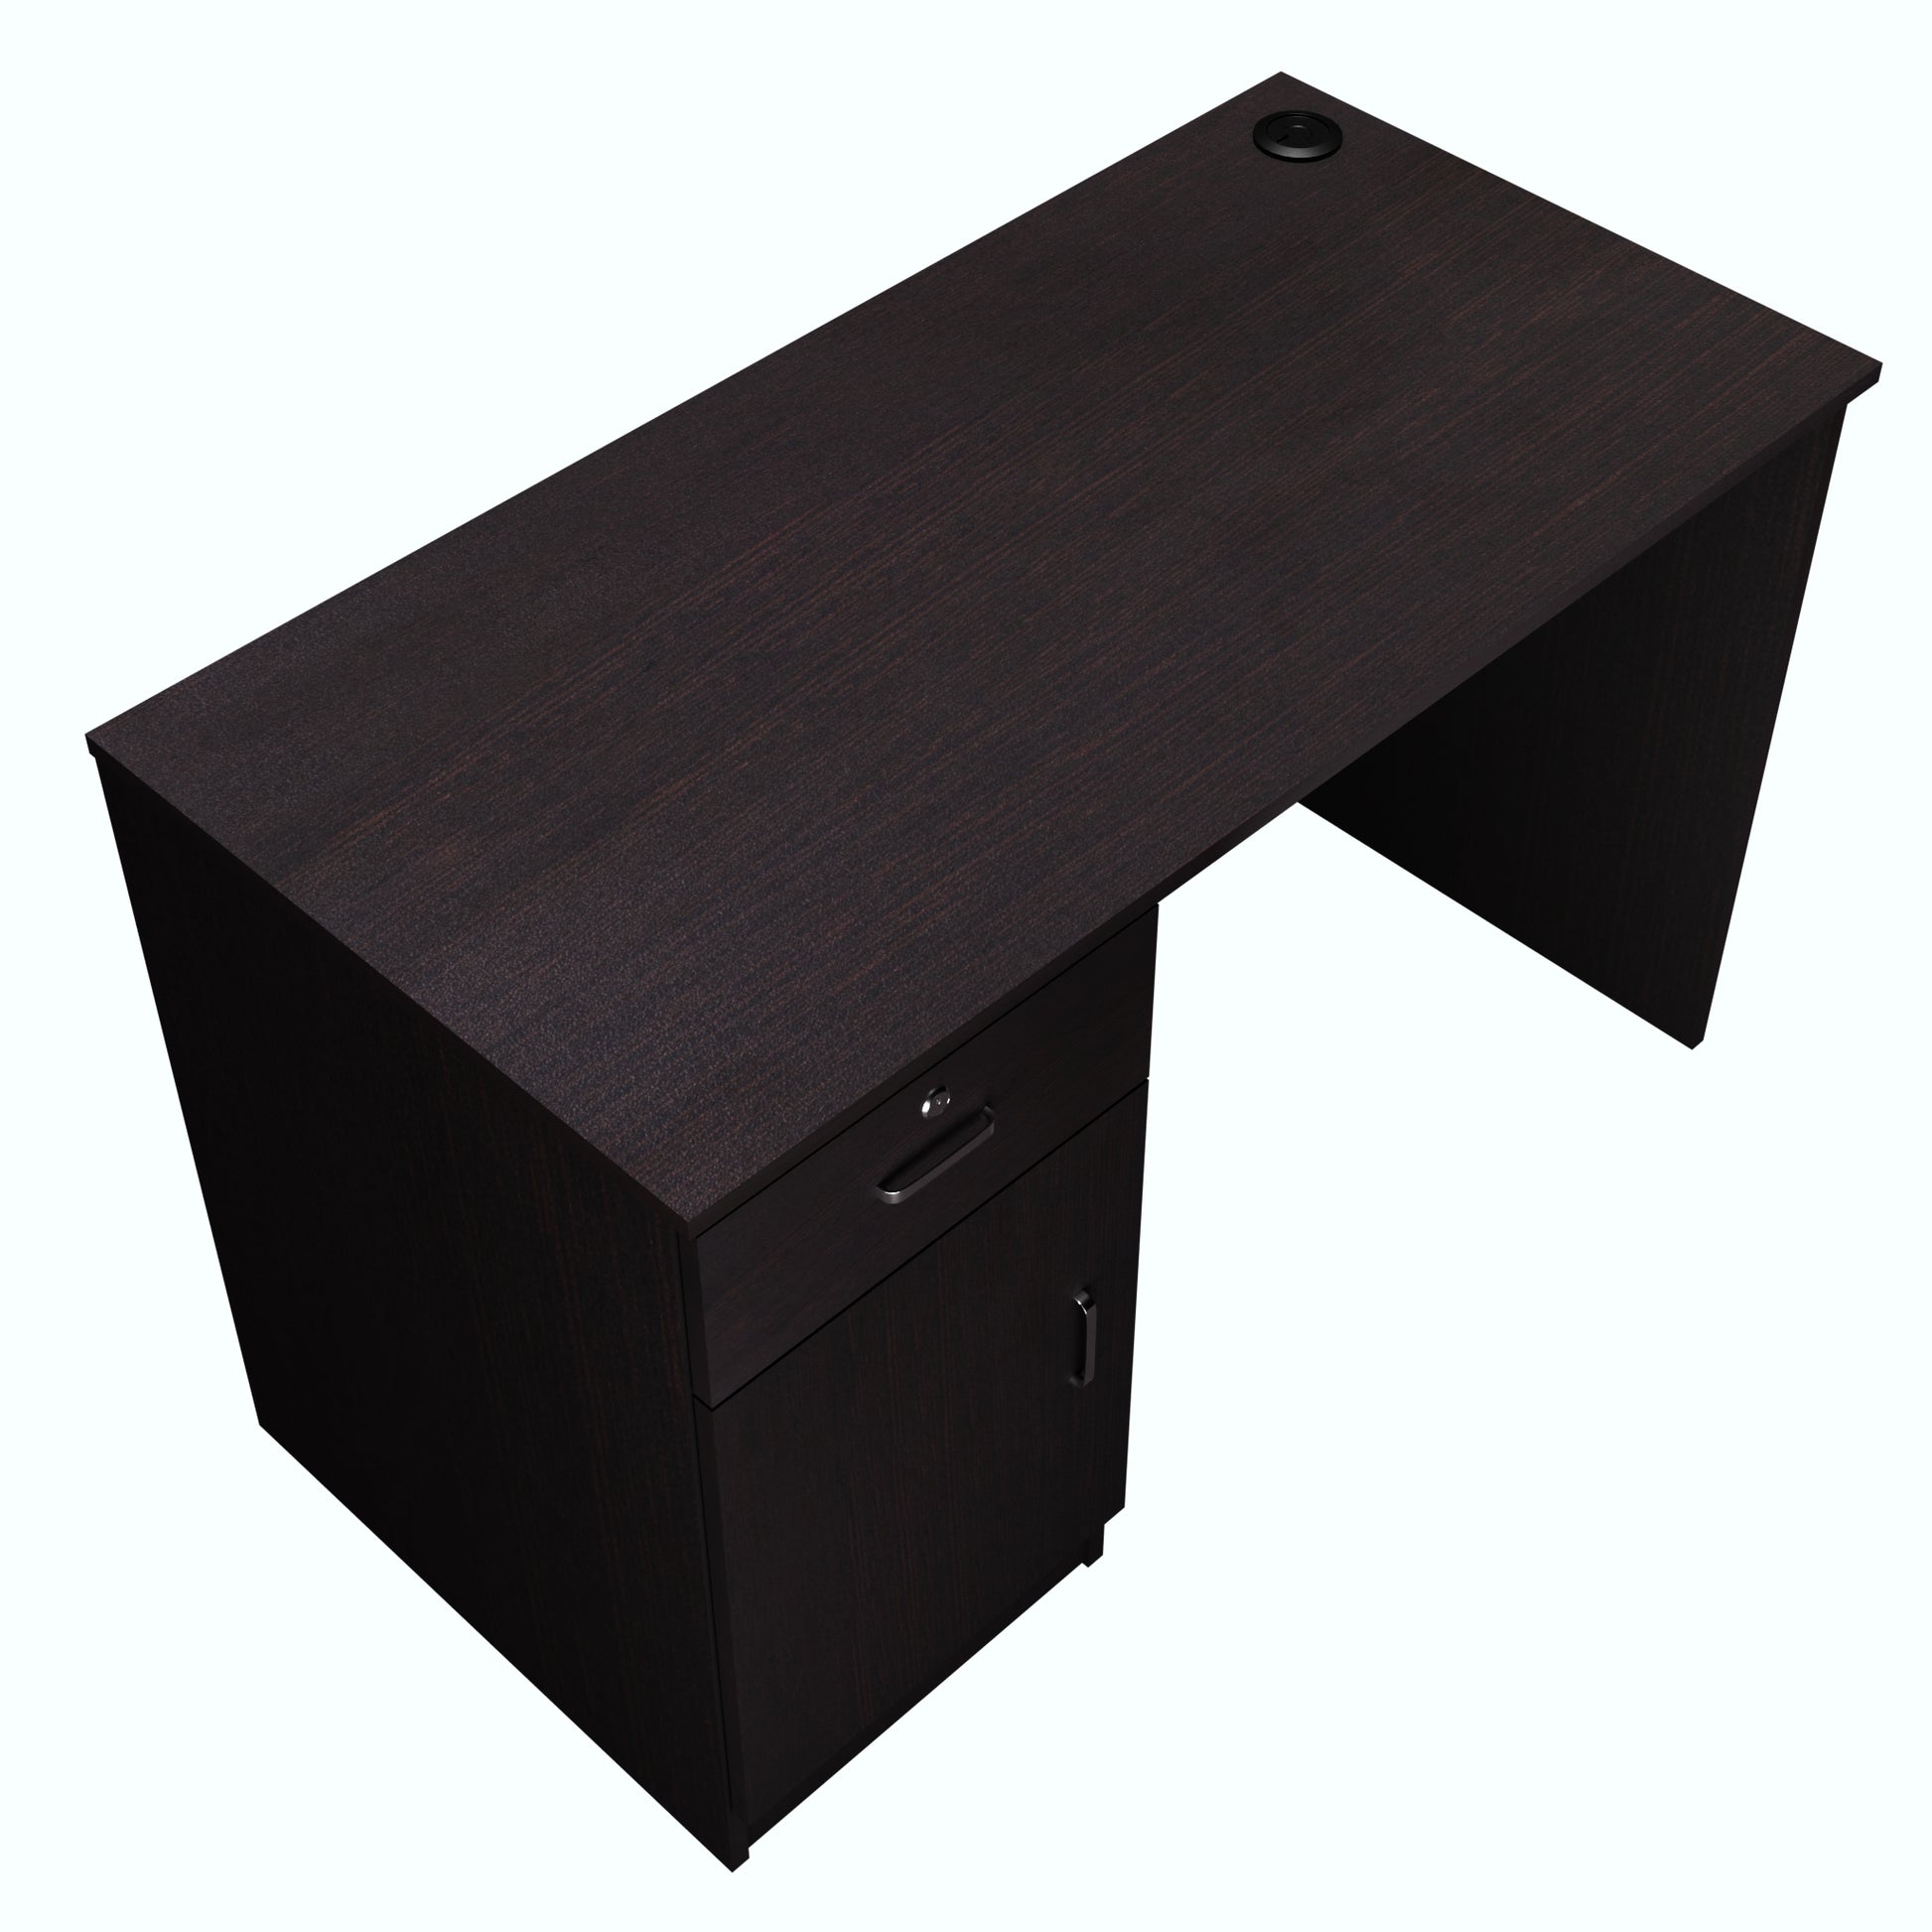 VIKI Engineered Wood Desk/Study Table 1 Drawer with 1 Door (Suede Finish, Frosty White and Wenge) Desks & Tables VIKI FURNITURE   